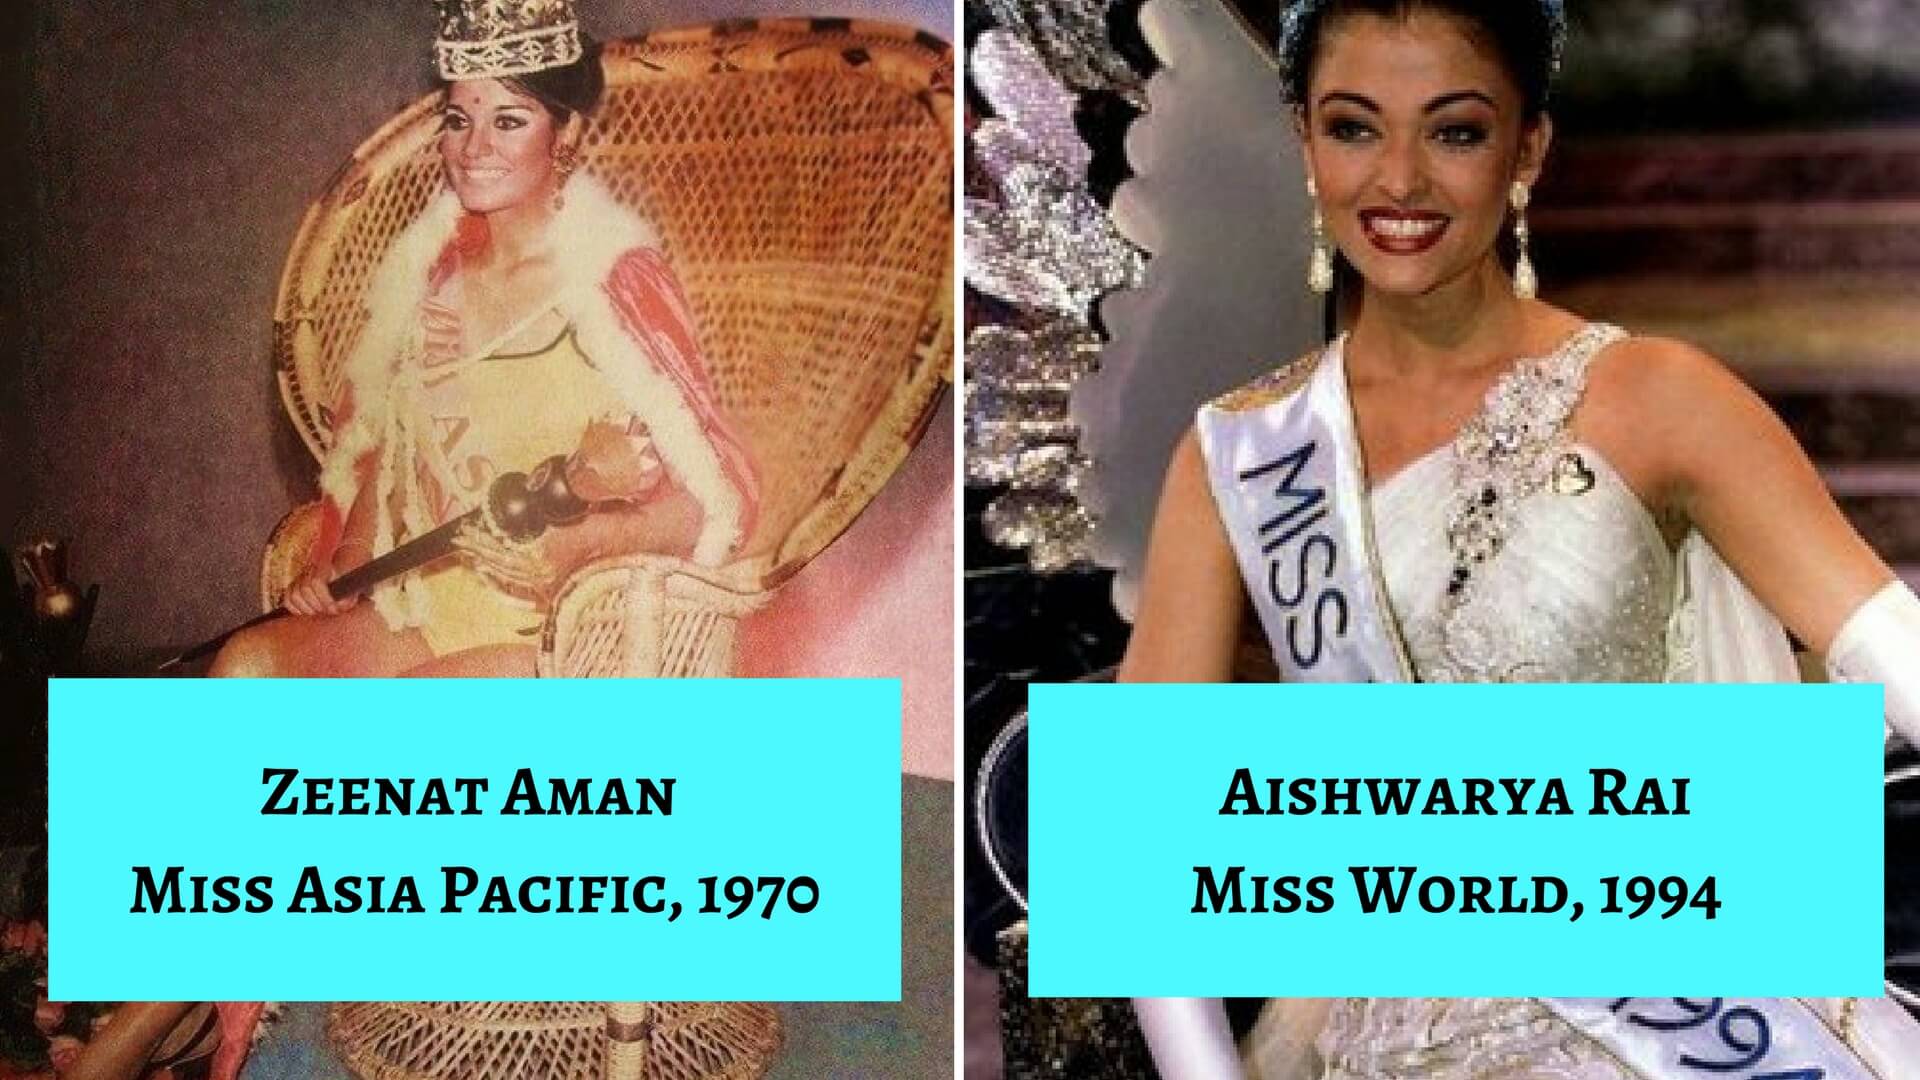 12 Indian Beauty Queens Made The Country Proud Internationally, We Bet You Don’t Know Half of These Models